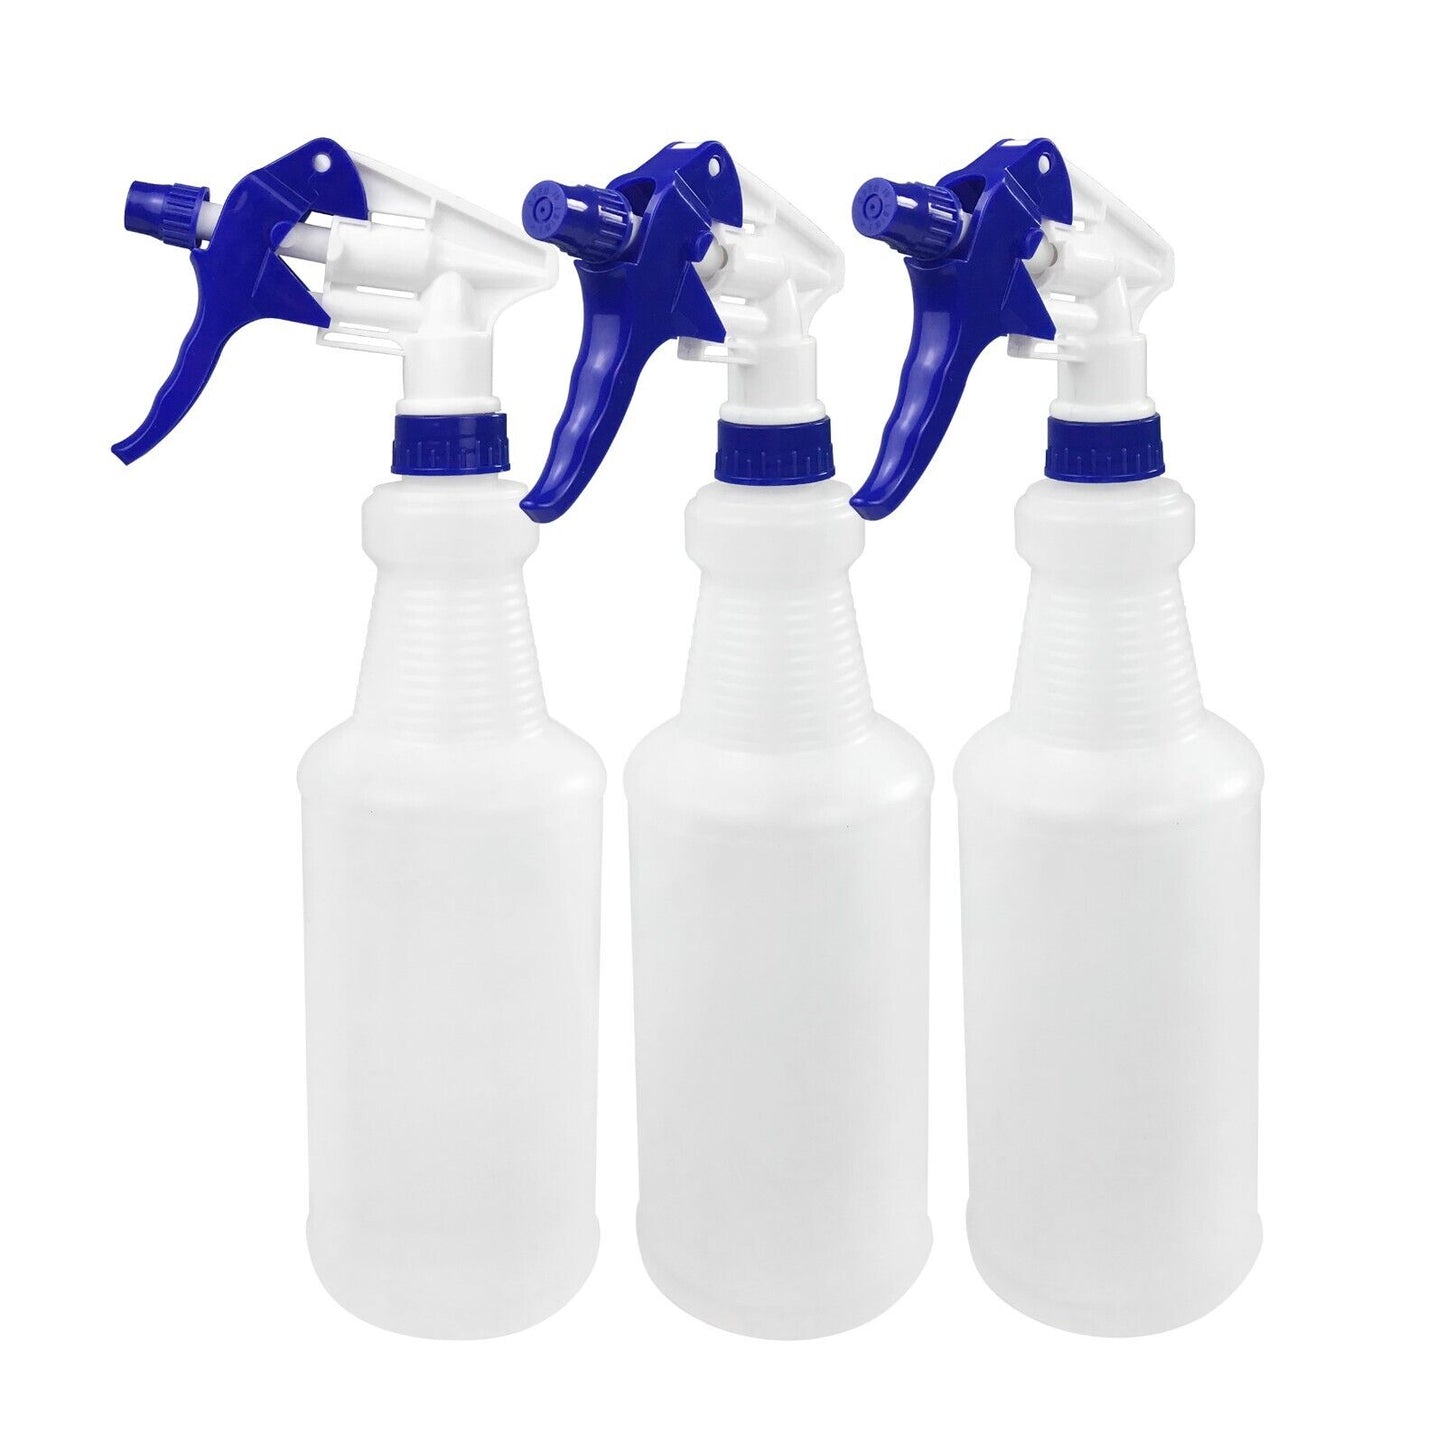 4-products Spray Bottle, Chemical Proportioner with Wall Rack, 8134-4B-9002